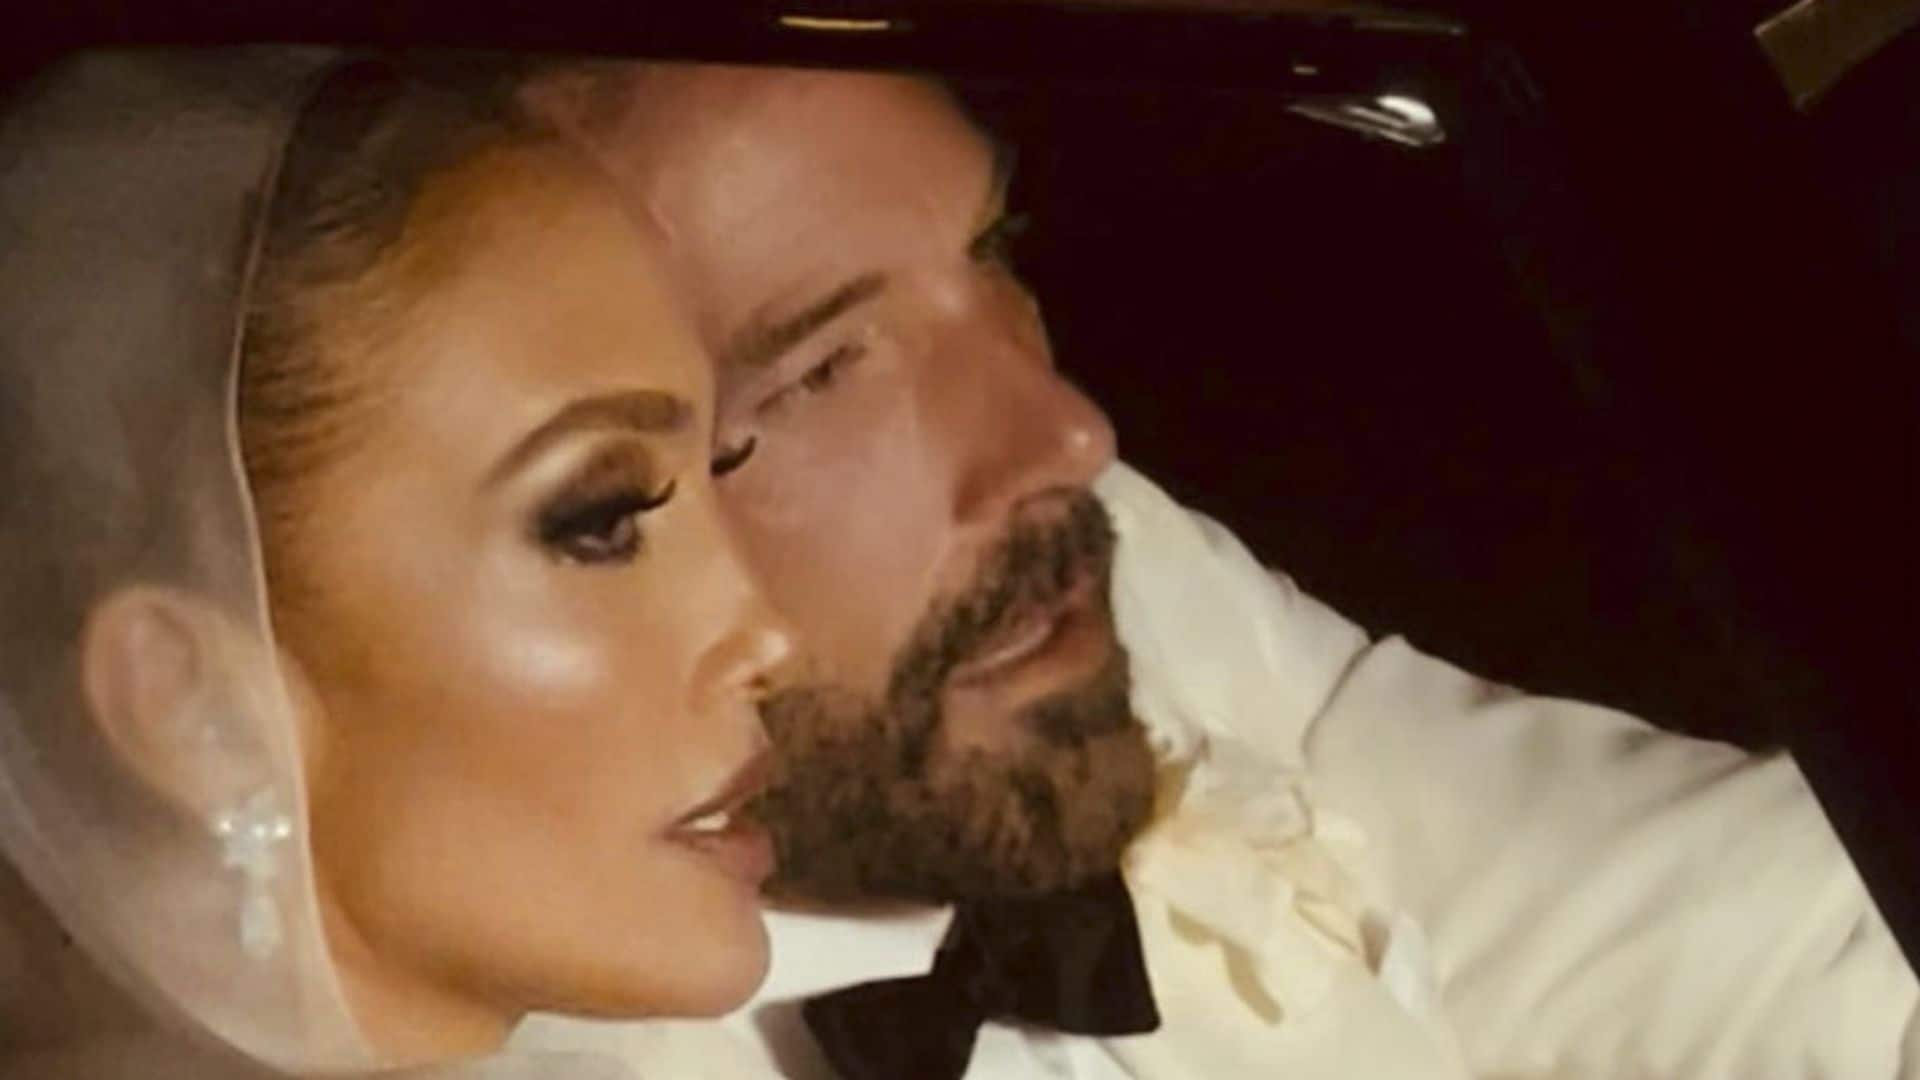 Jennifer Lopez shows framed wedding photo with Ben Affleck amid divorce and reconciliation rumors